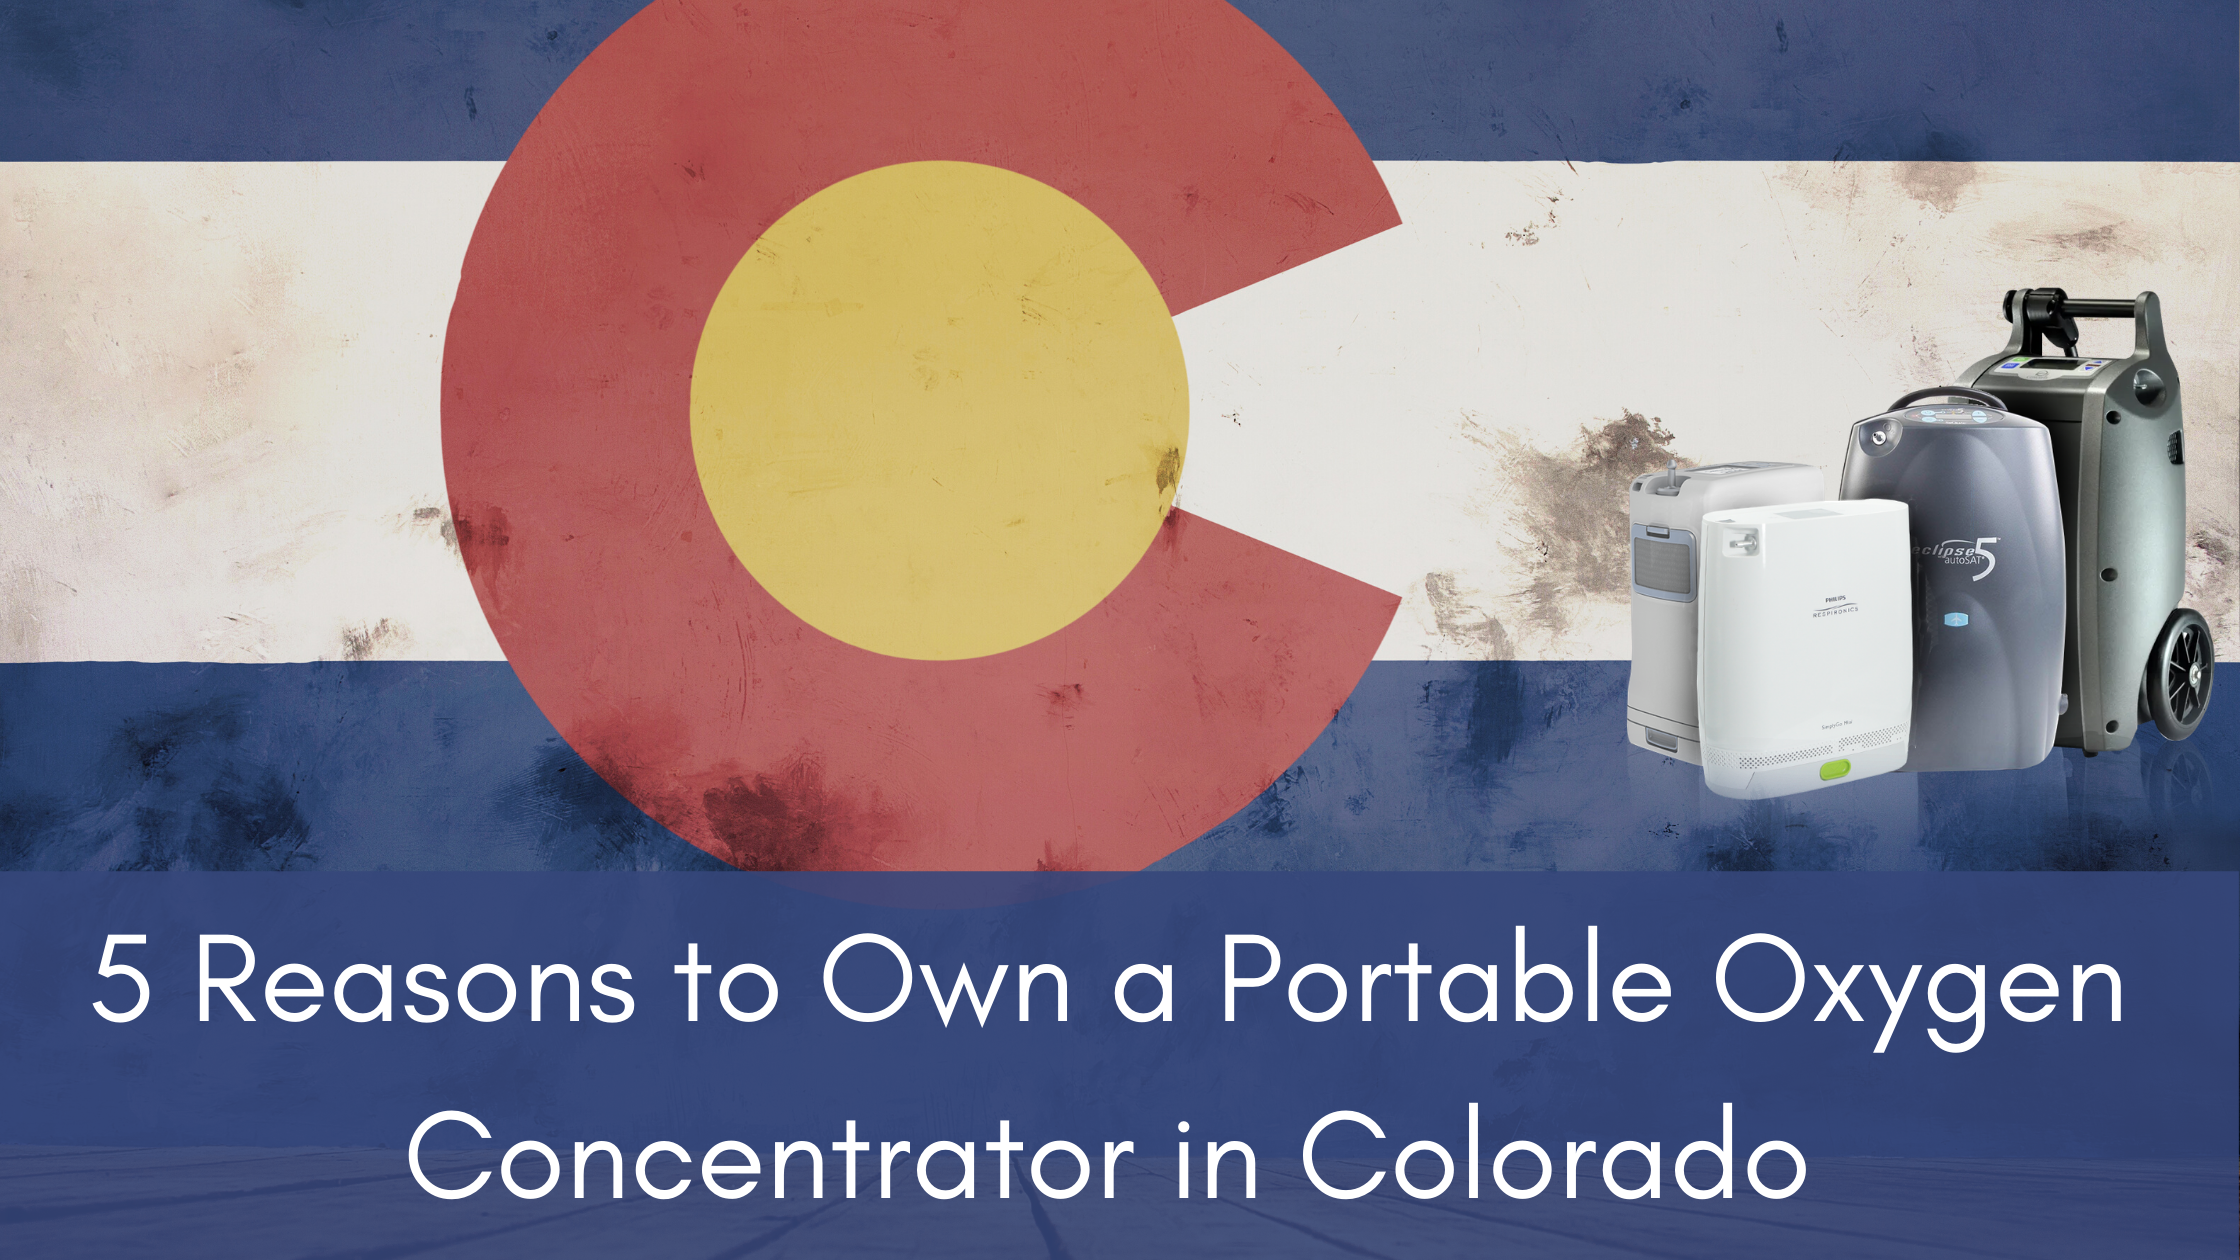 5 Reasons to Own a Portable Oxygen Concentrator in Colorado